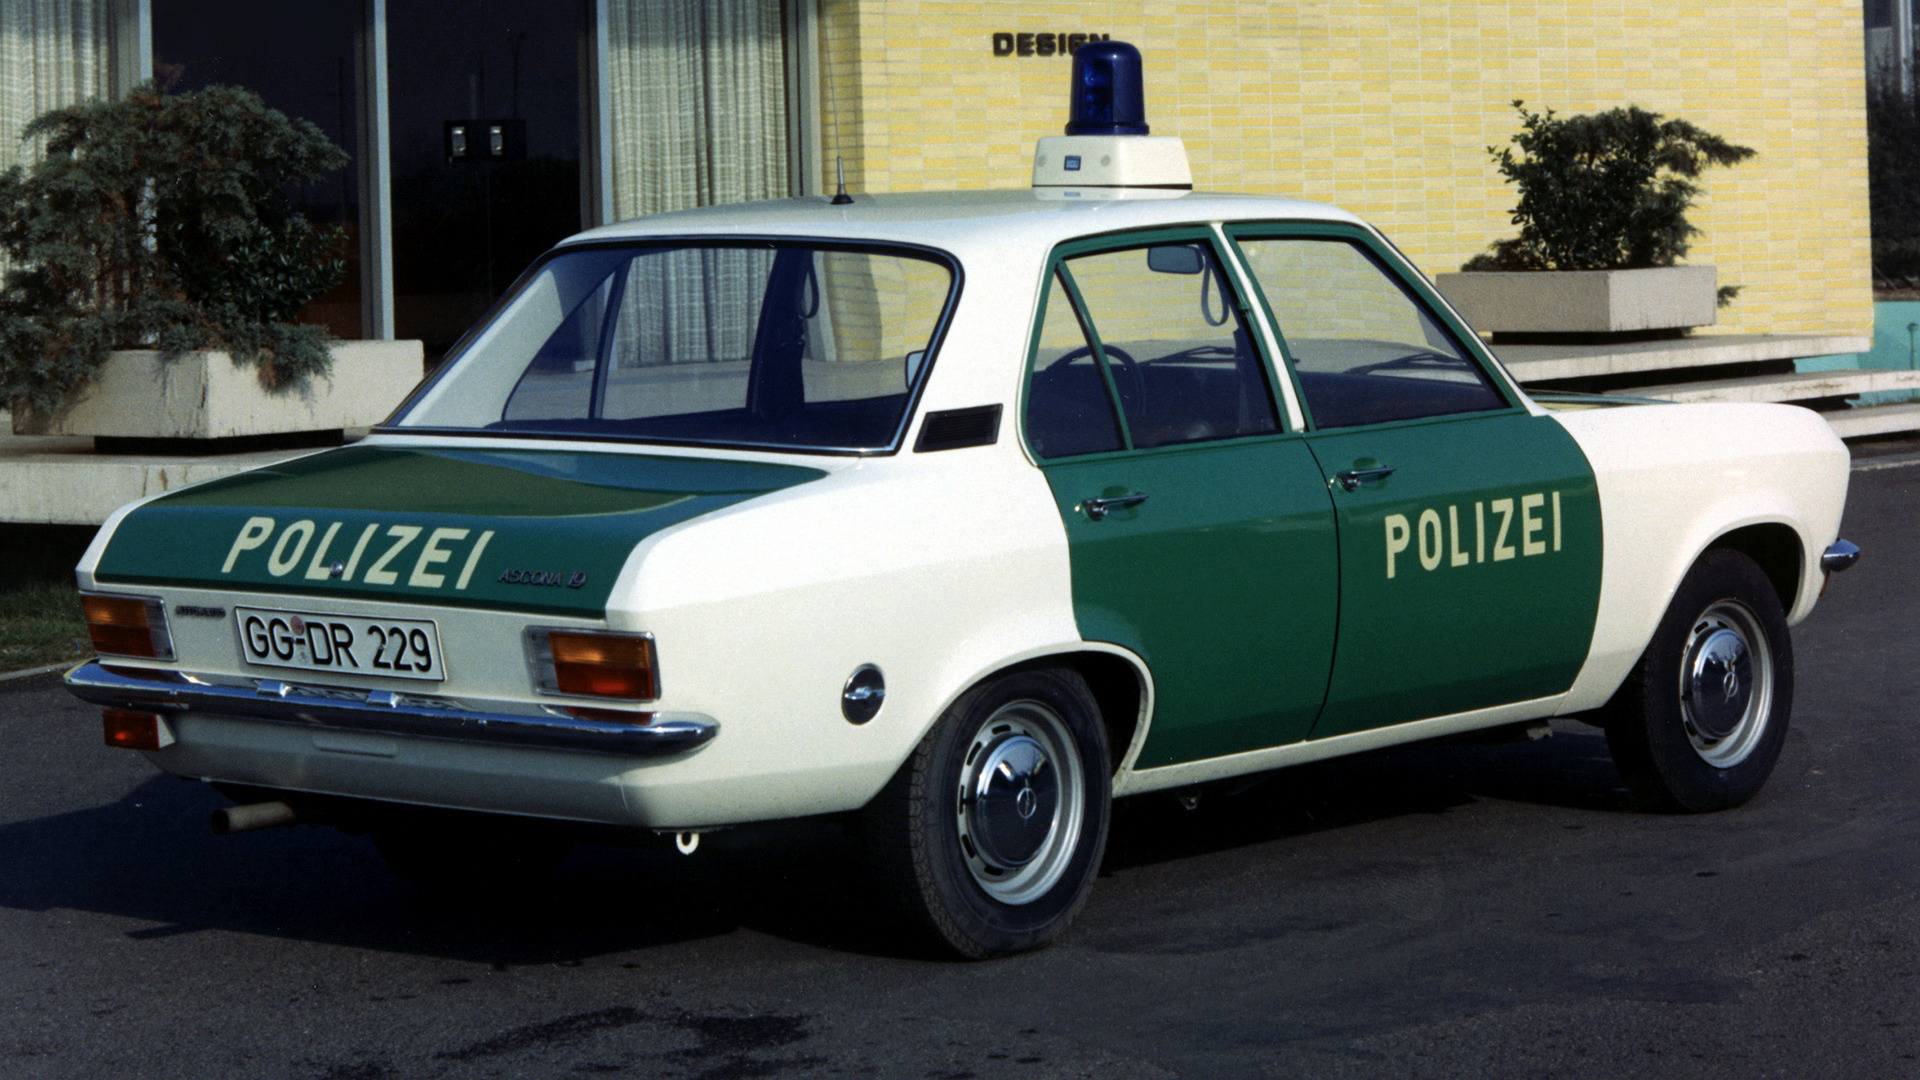 1973 Opel Ascona Polizei - Wallpapers and HD Images | Car Pixel